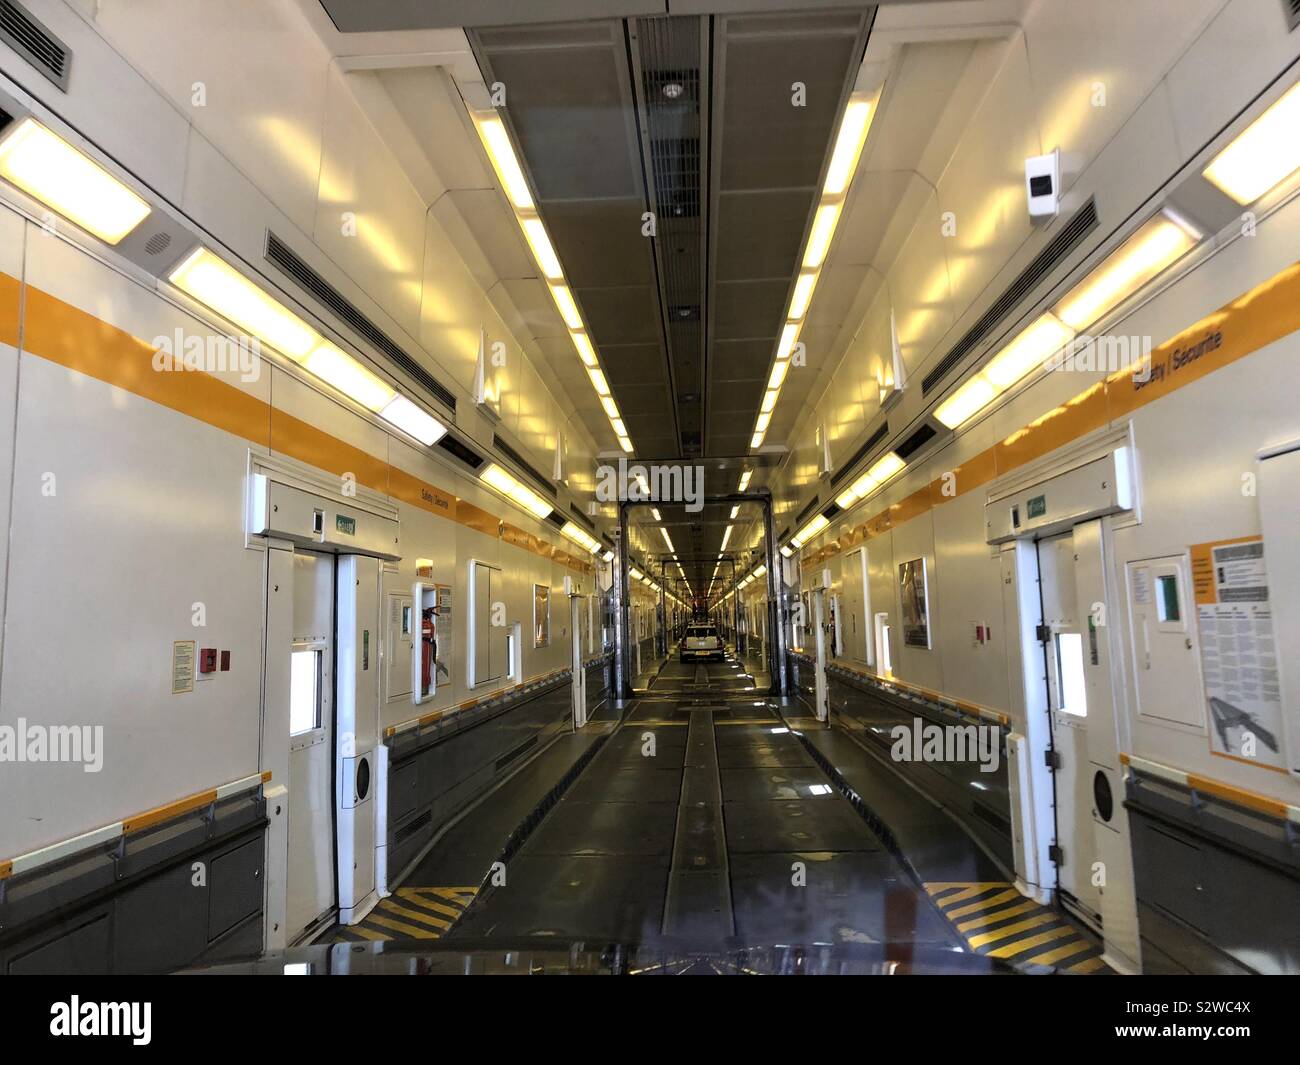 Channel Tunnel Train High Resolution Stock Photography and Images - Alamy